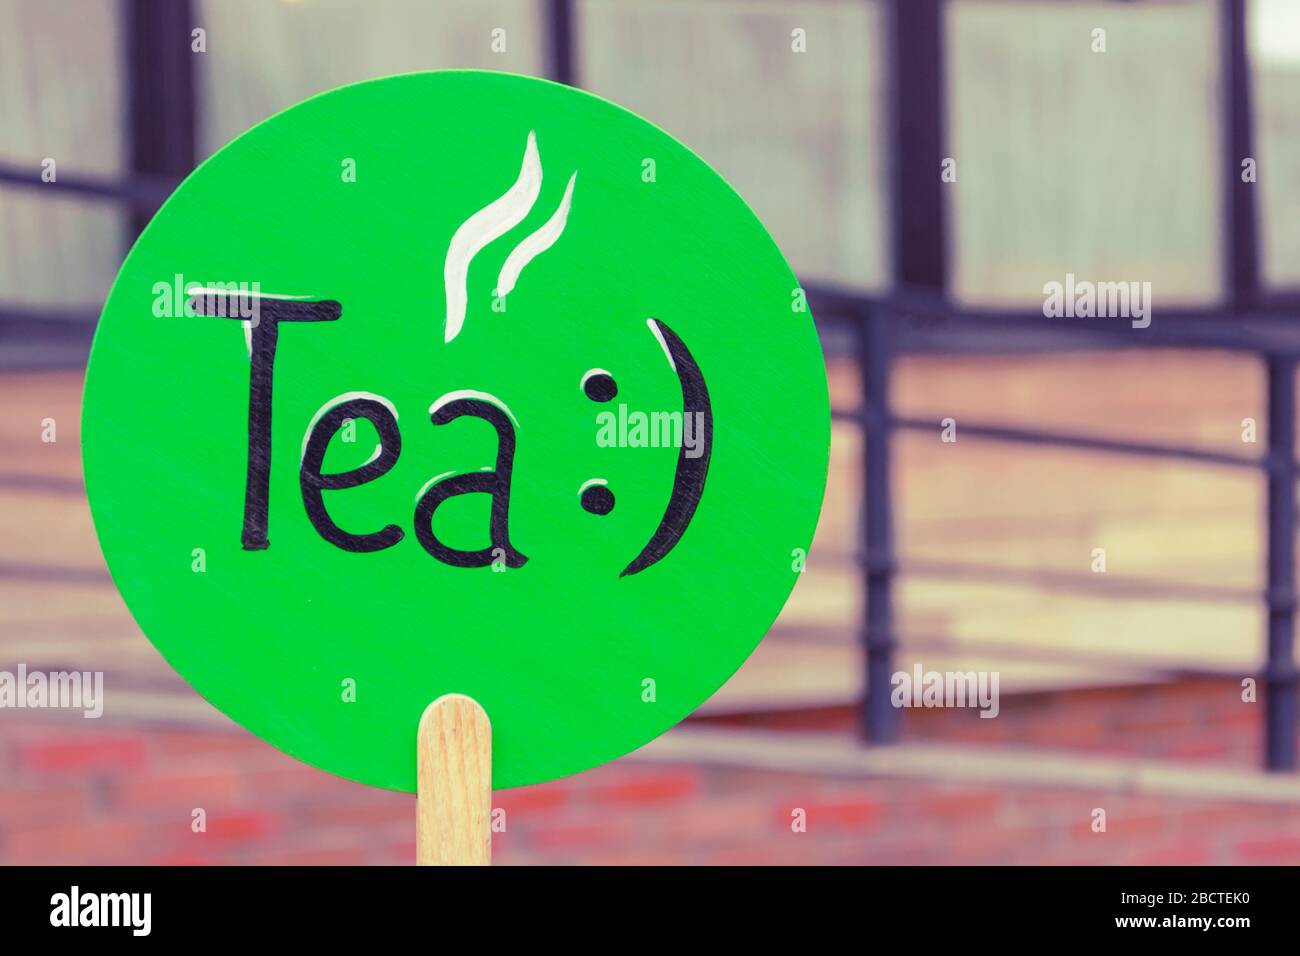 inscription tea with a smiley on a green plate of a round shape on the street. teahouse advertisement, cafe. lunch, snack, tea time Stock Photo